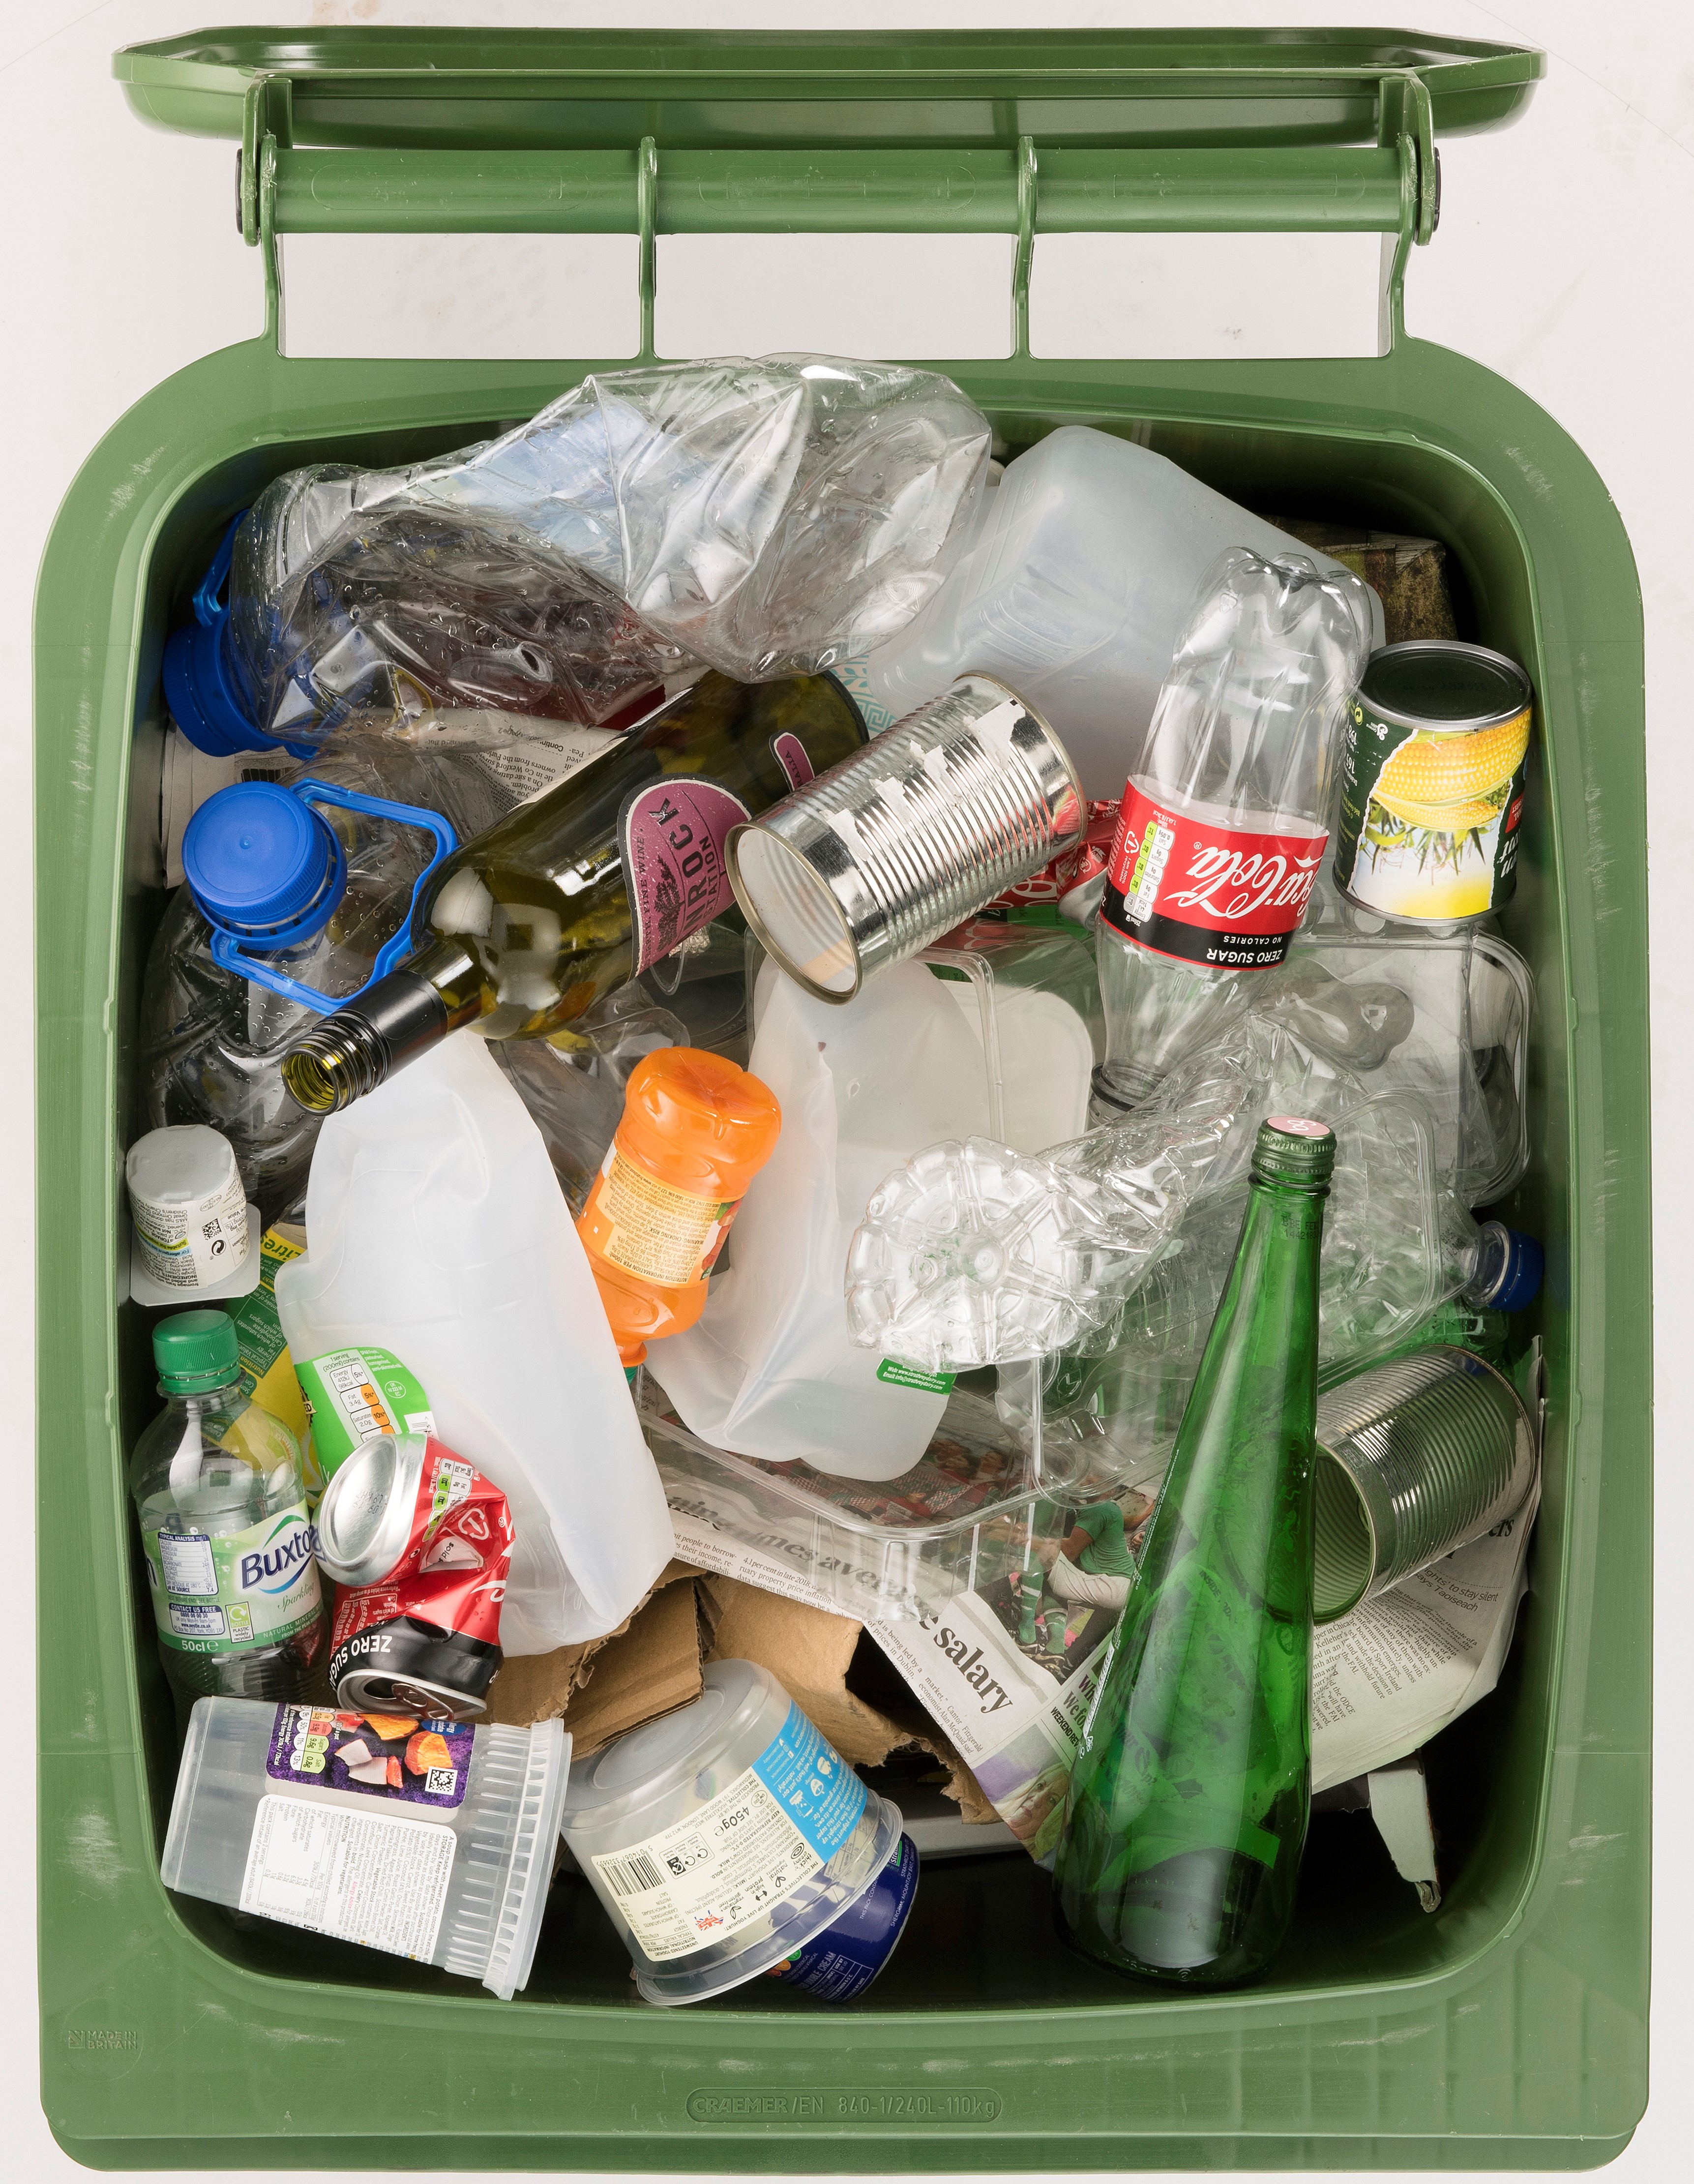 One bin for recycling is the most convenient and environmentally friendly way to recycle